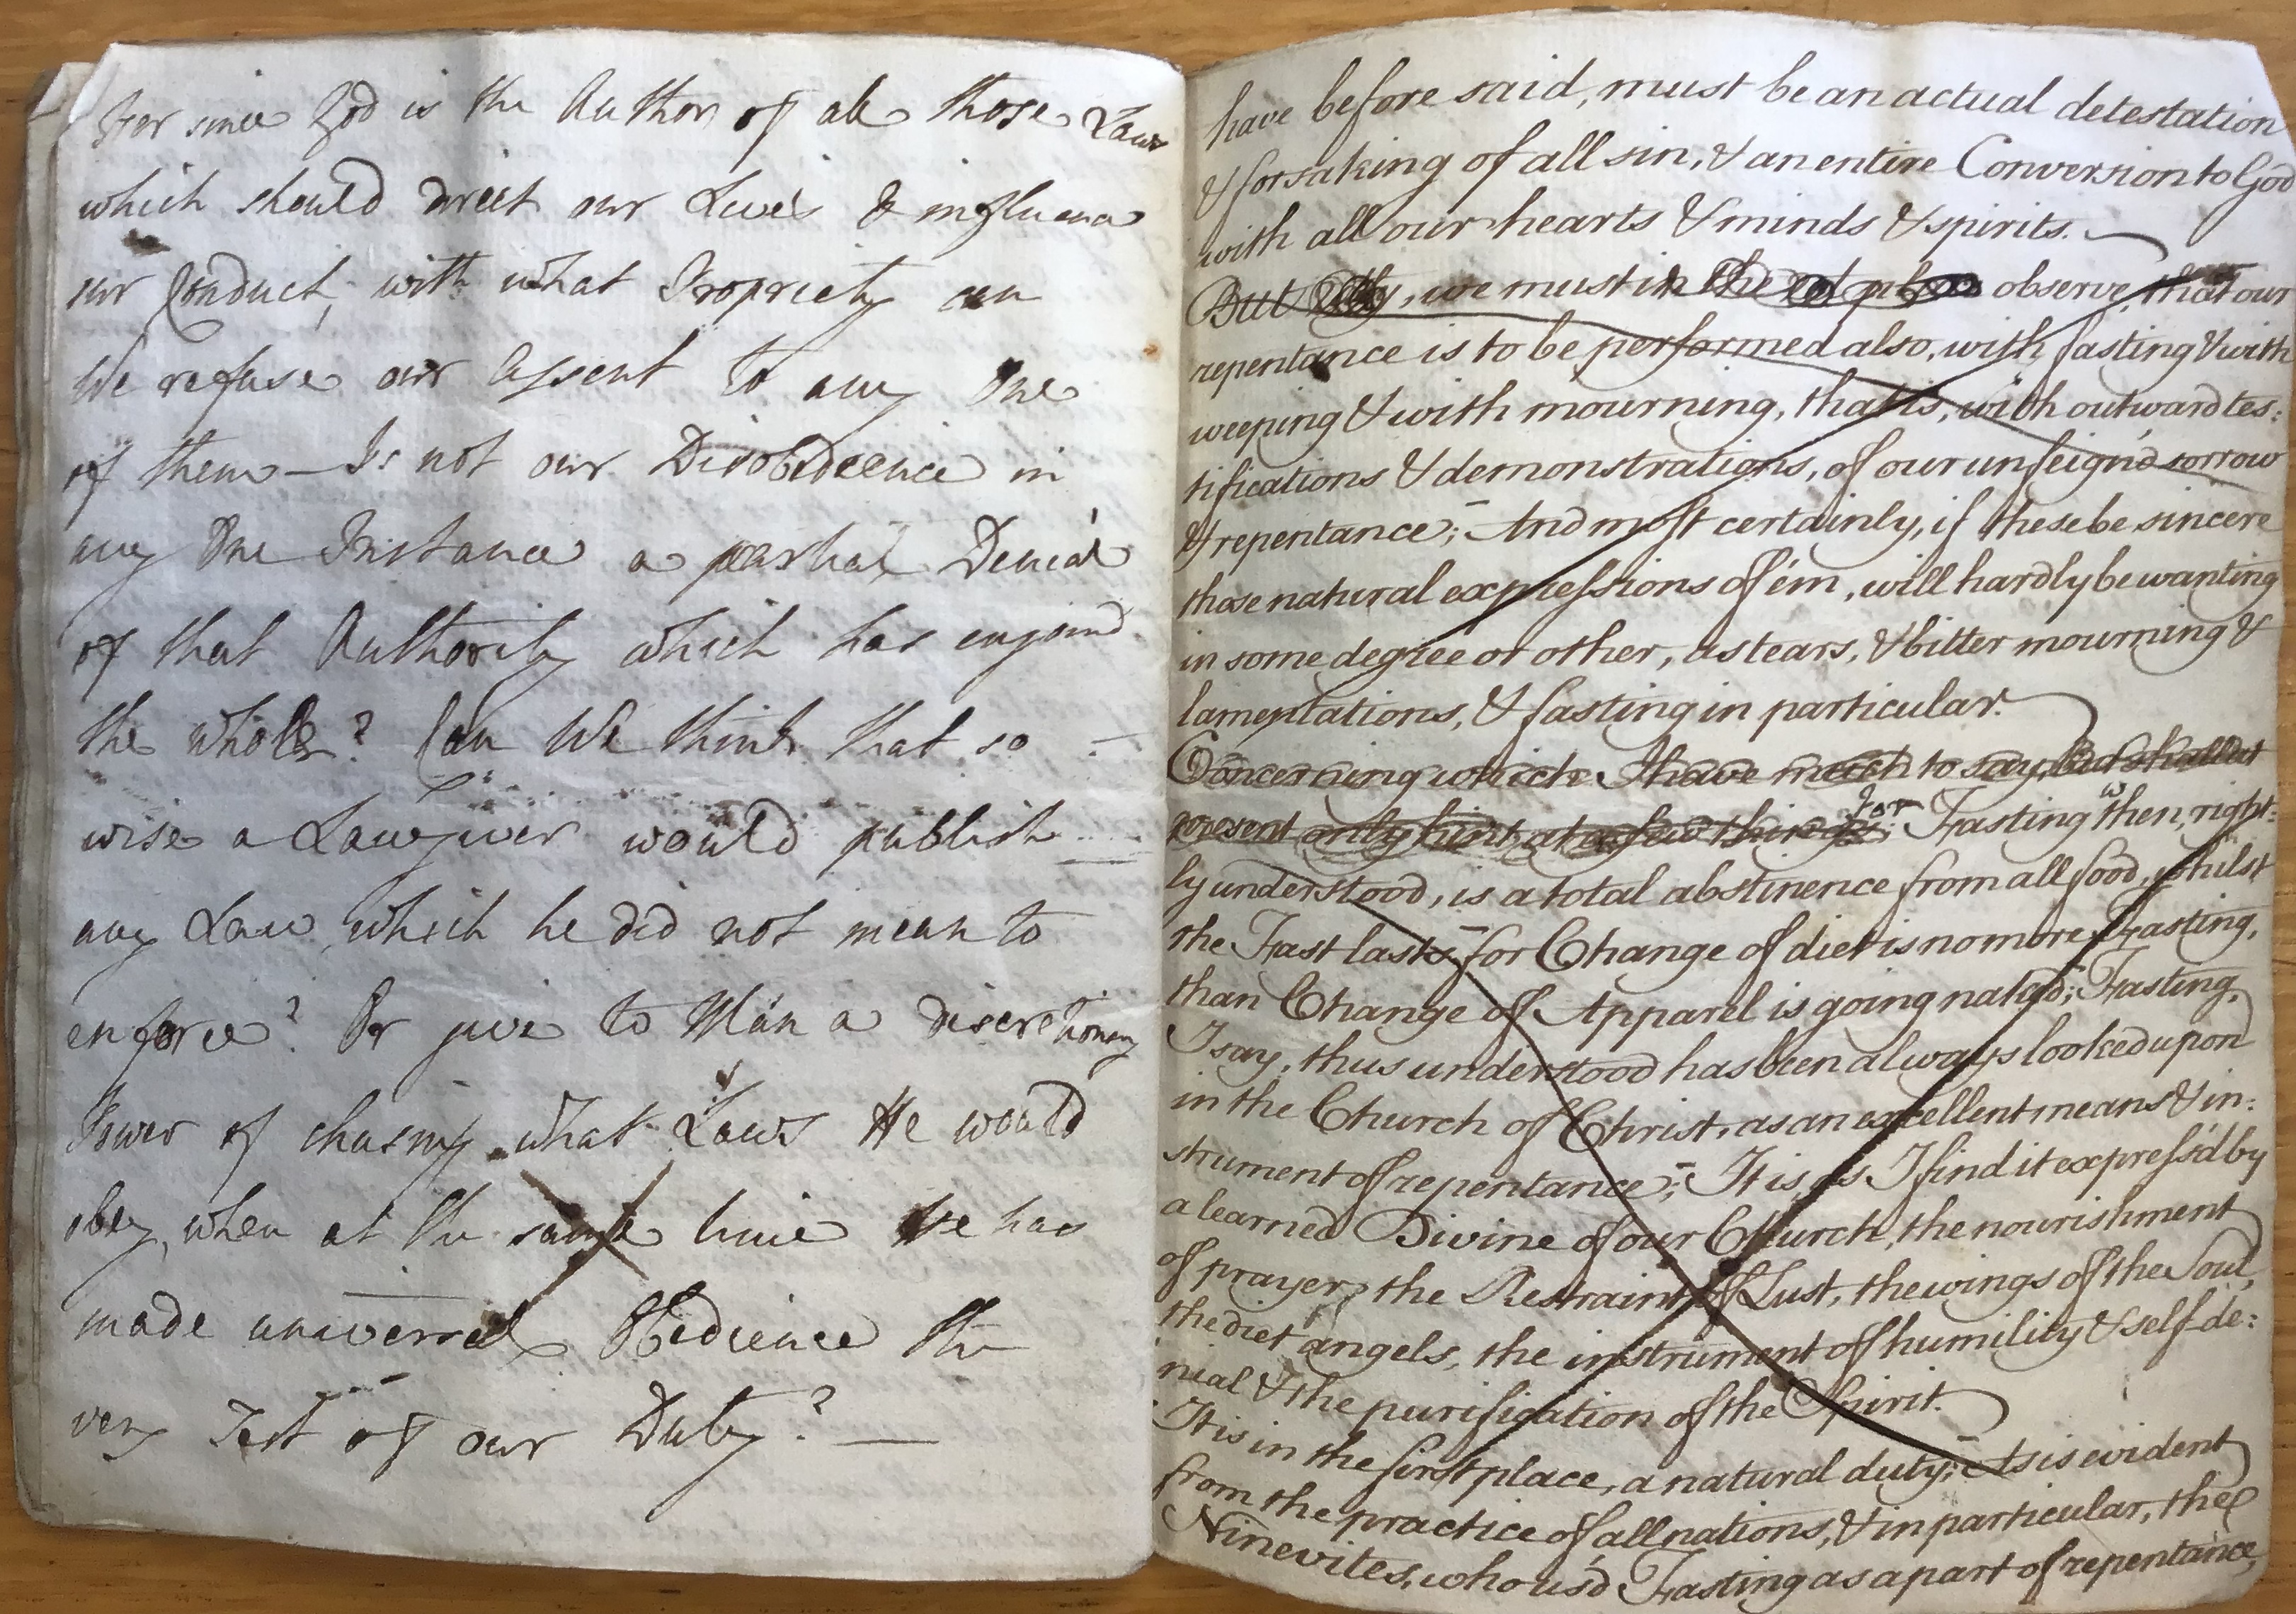 Sermon No. 2, dating originally from 1765. Here we see a good example of the contrasting handwriting present in some of the sermons in the collection.